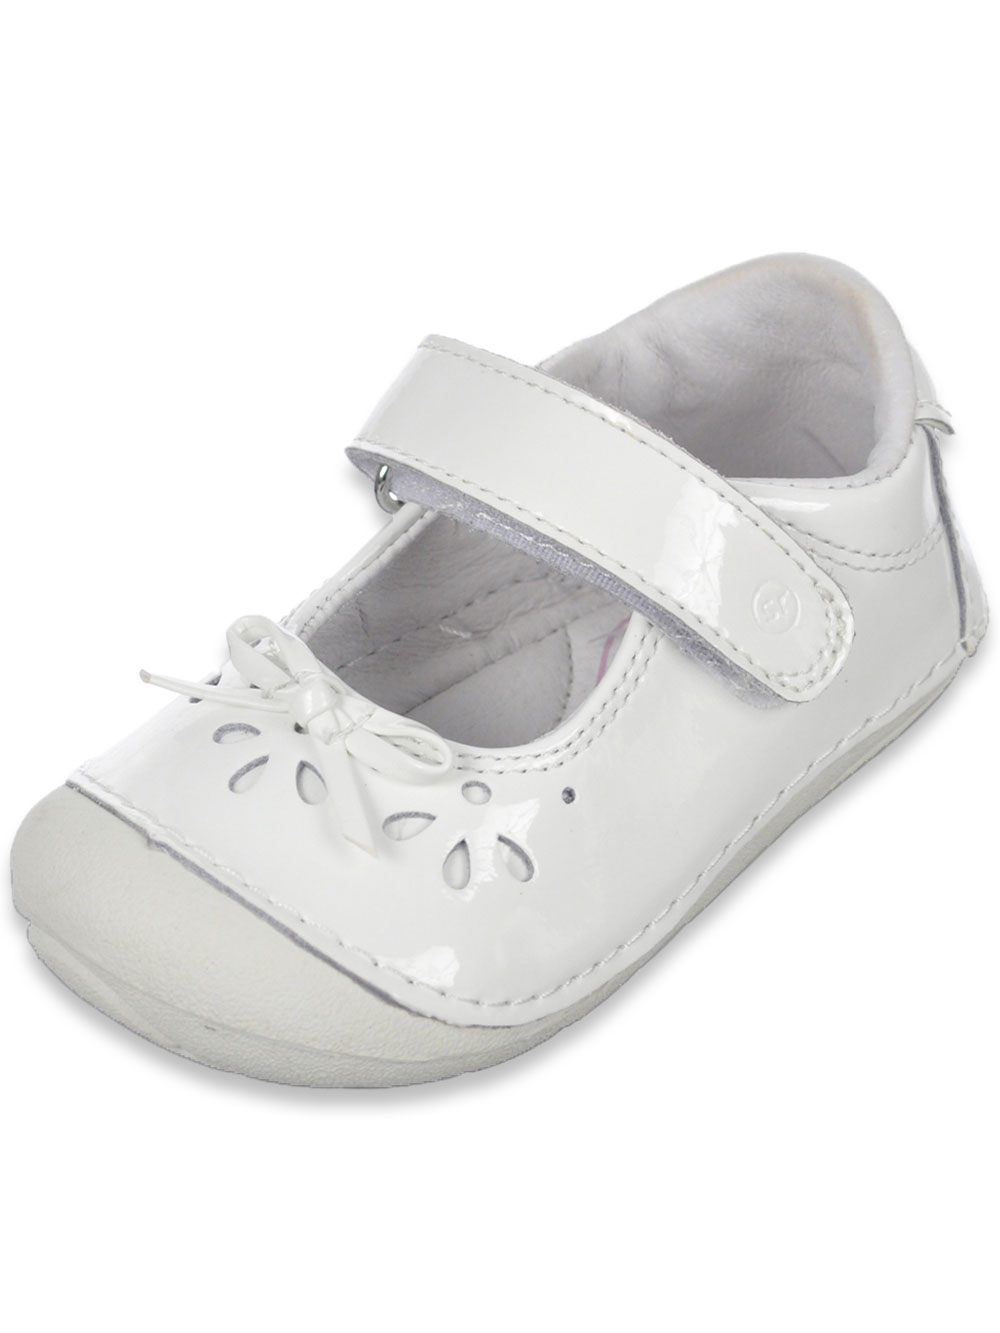 Girls' Mary Janes by Stride Rite in 